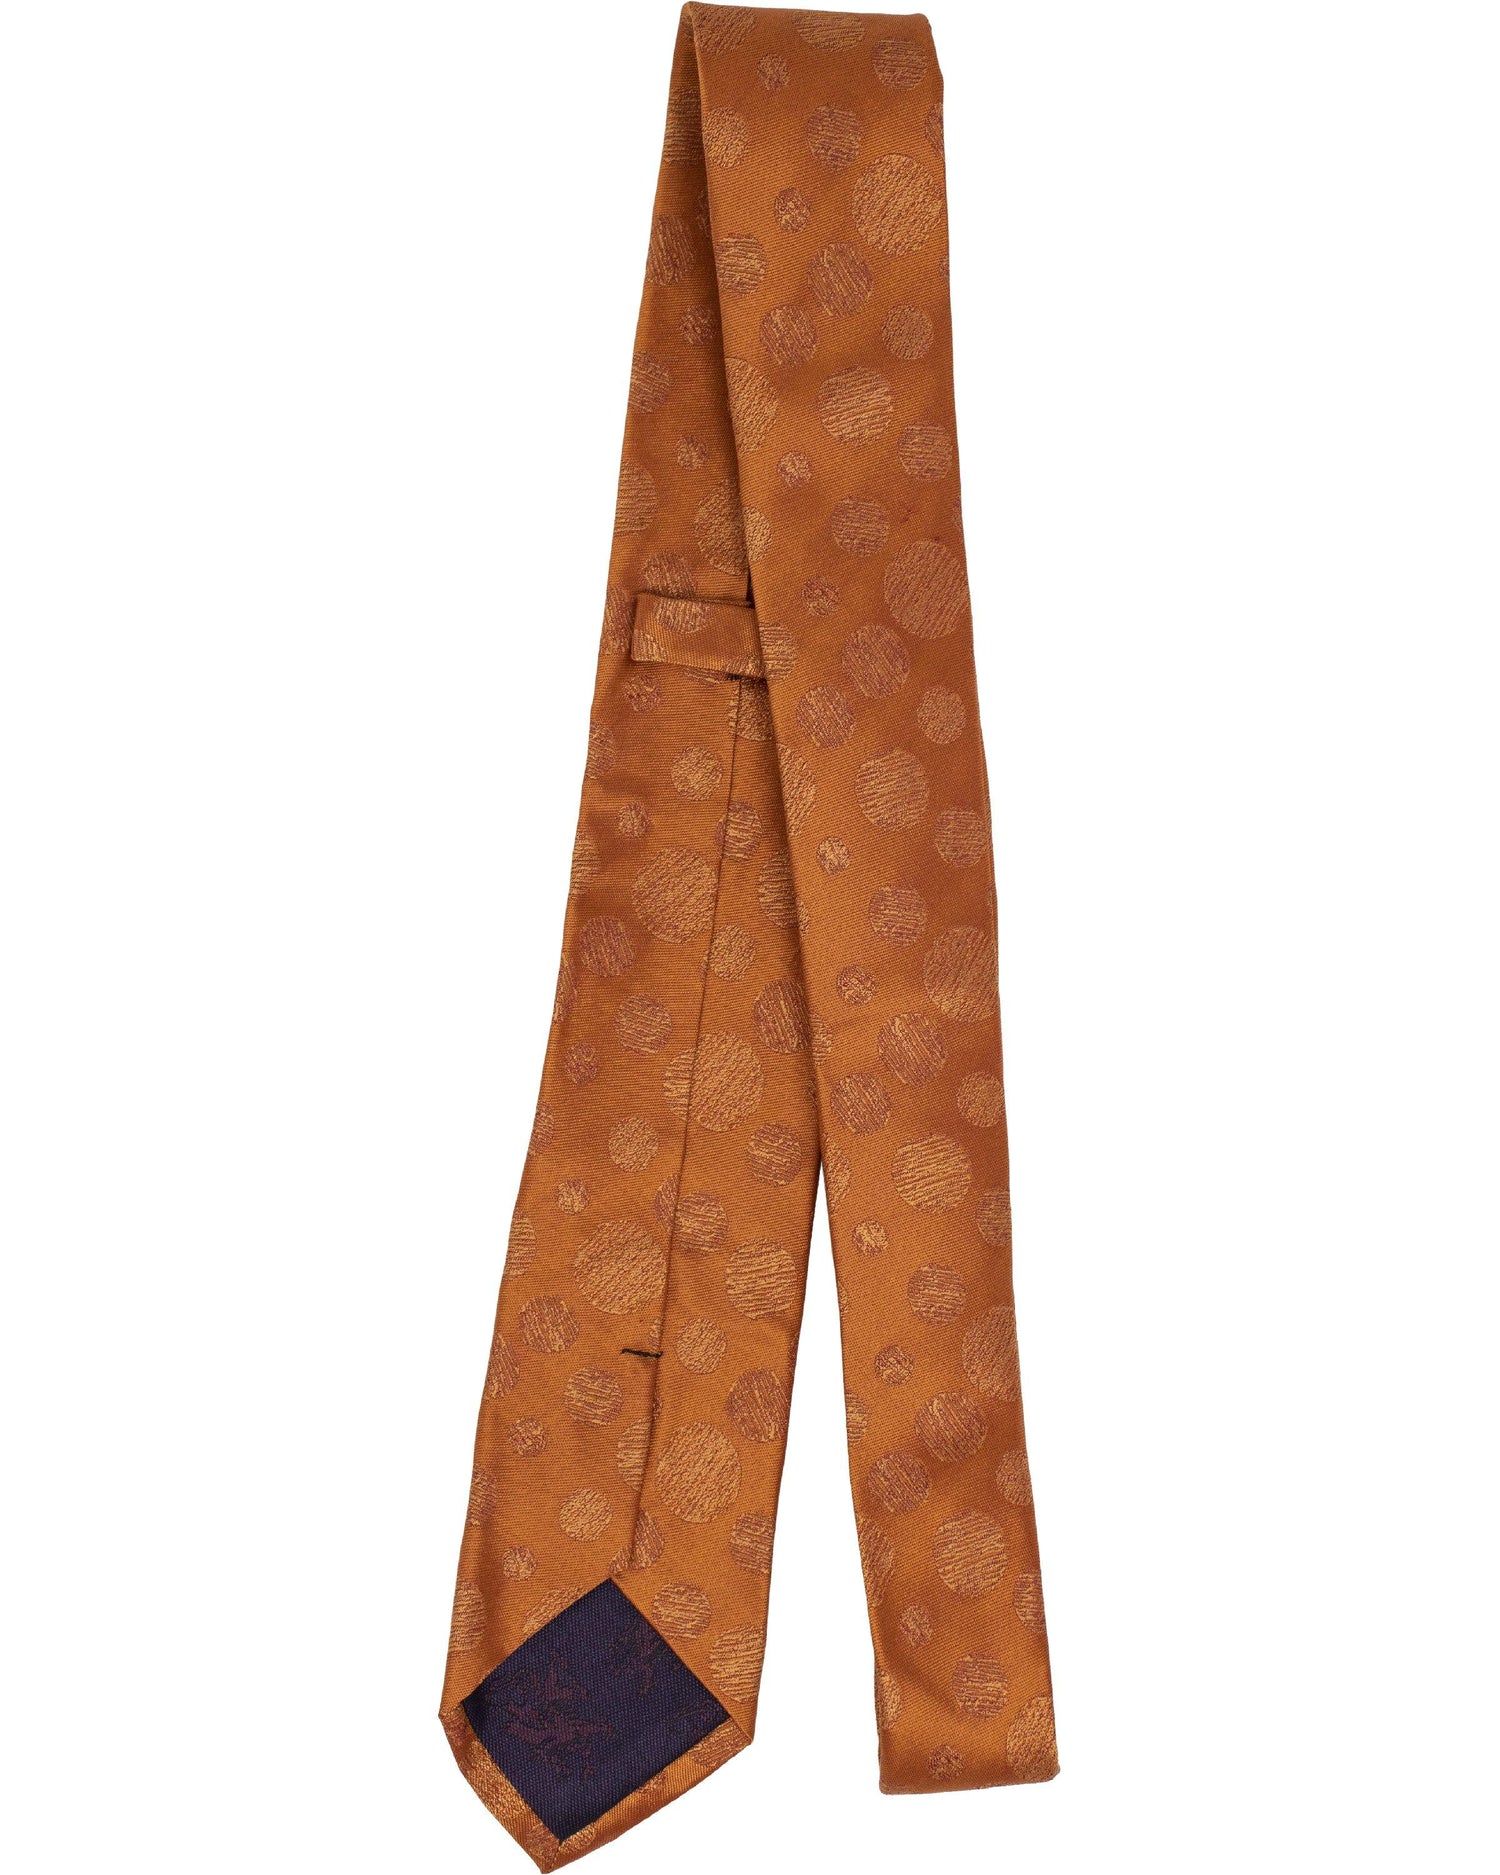 Horace Grapefruit Tie - Lords Of Harlech